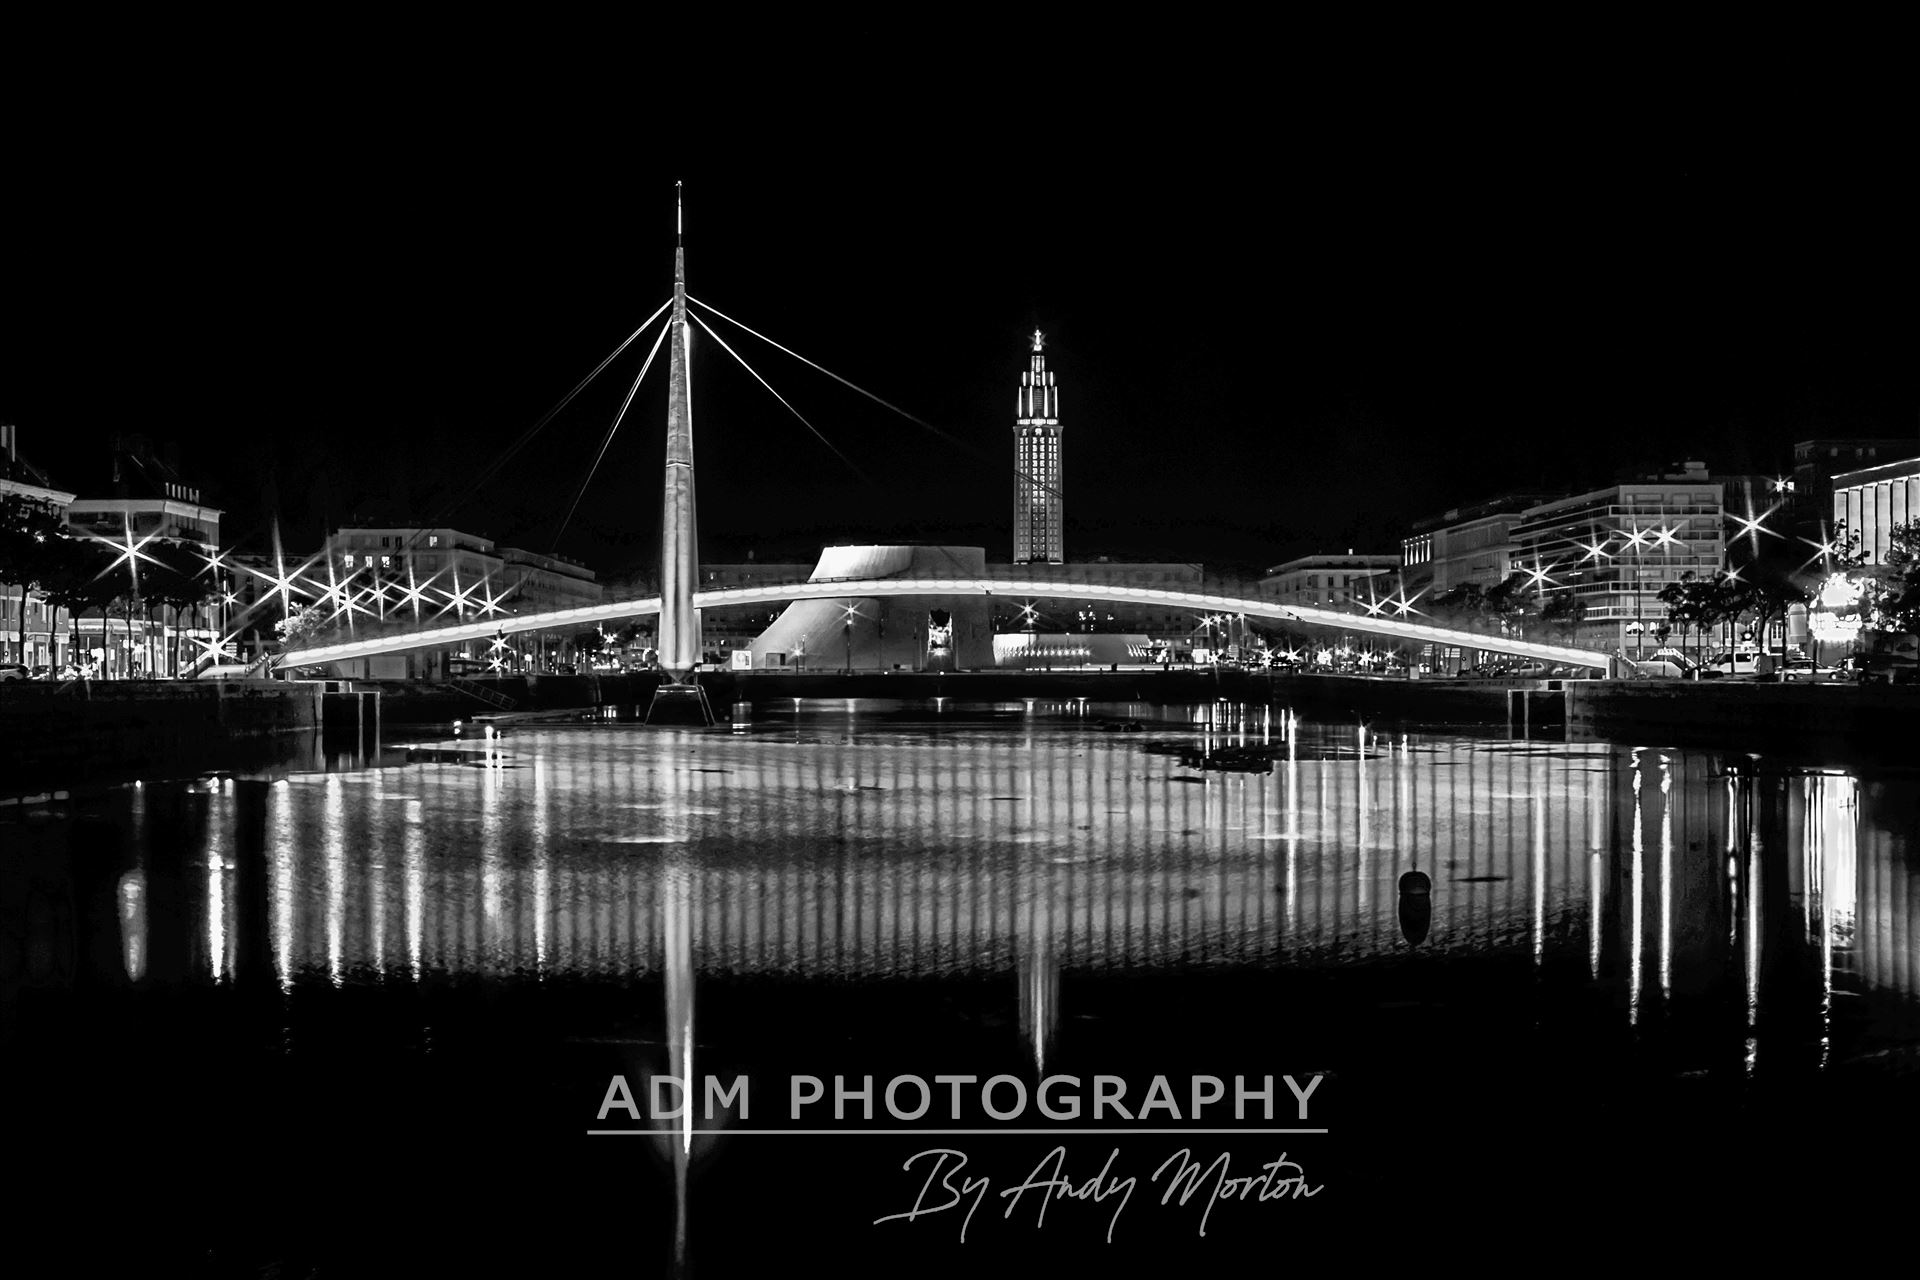 Bassin Du Commerce Bridge At Night In Le Havre, France  by Andy Morton Photography